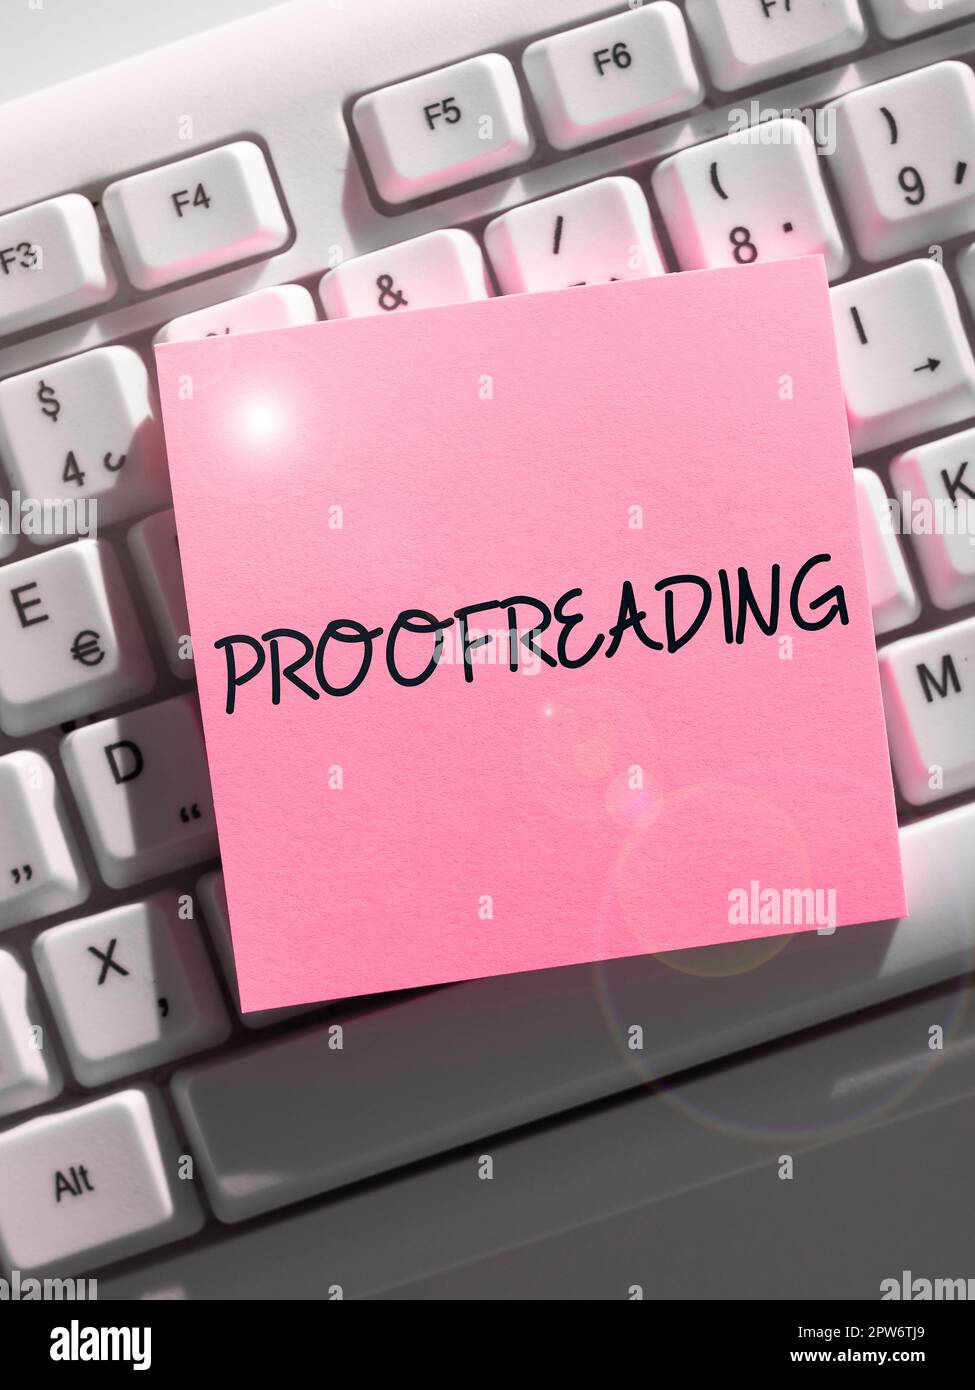 Sign displaying Proofreading, Concept meaning act of reading and marking spelling, grammar and syntax mistakes Stock Photo